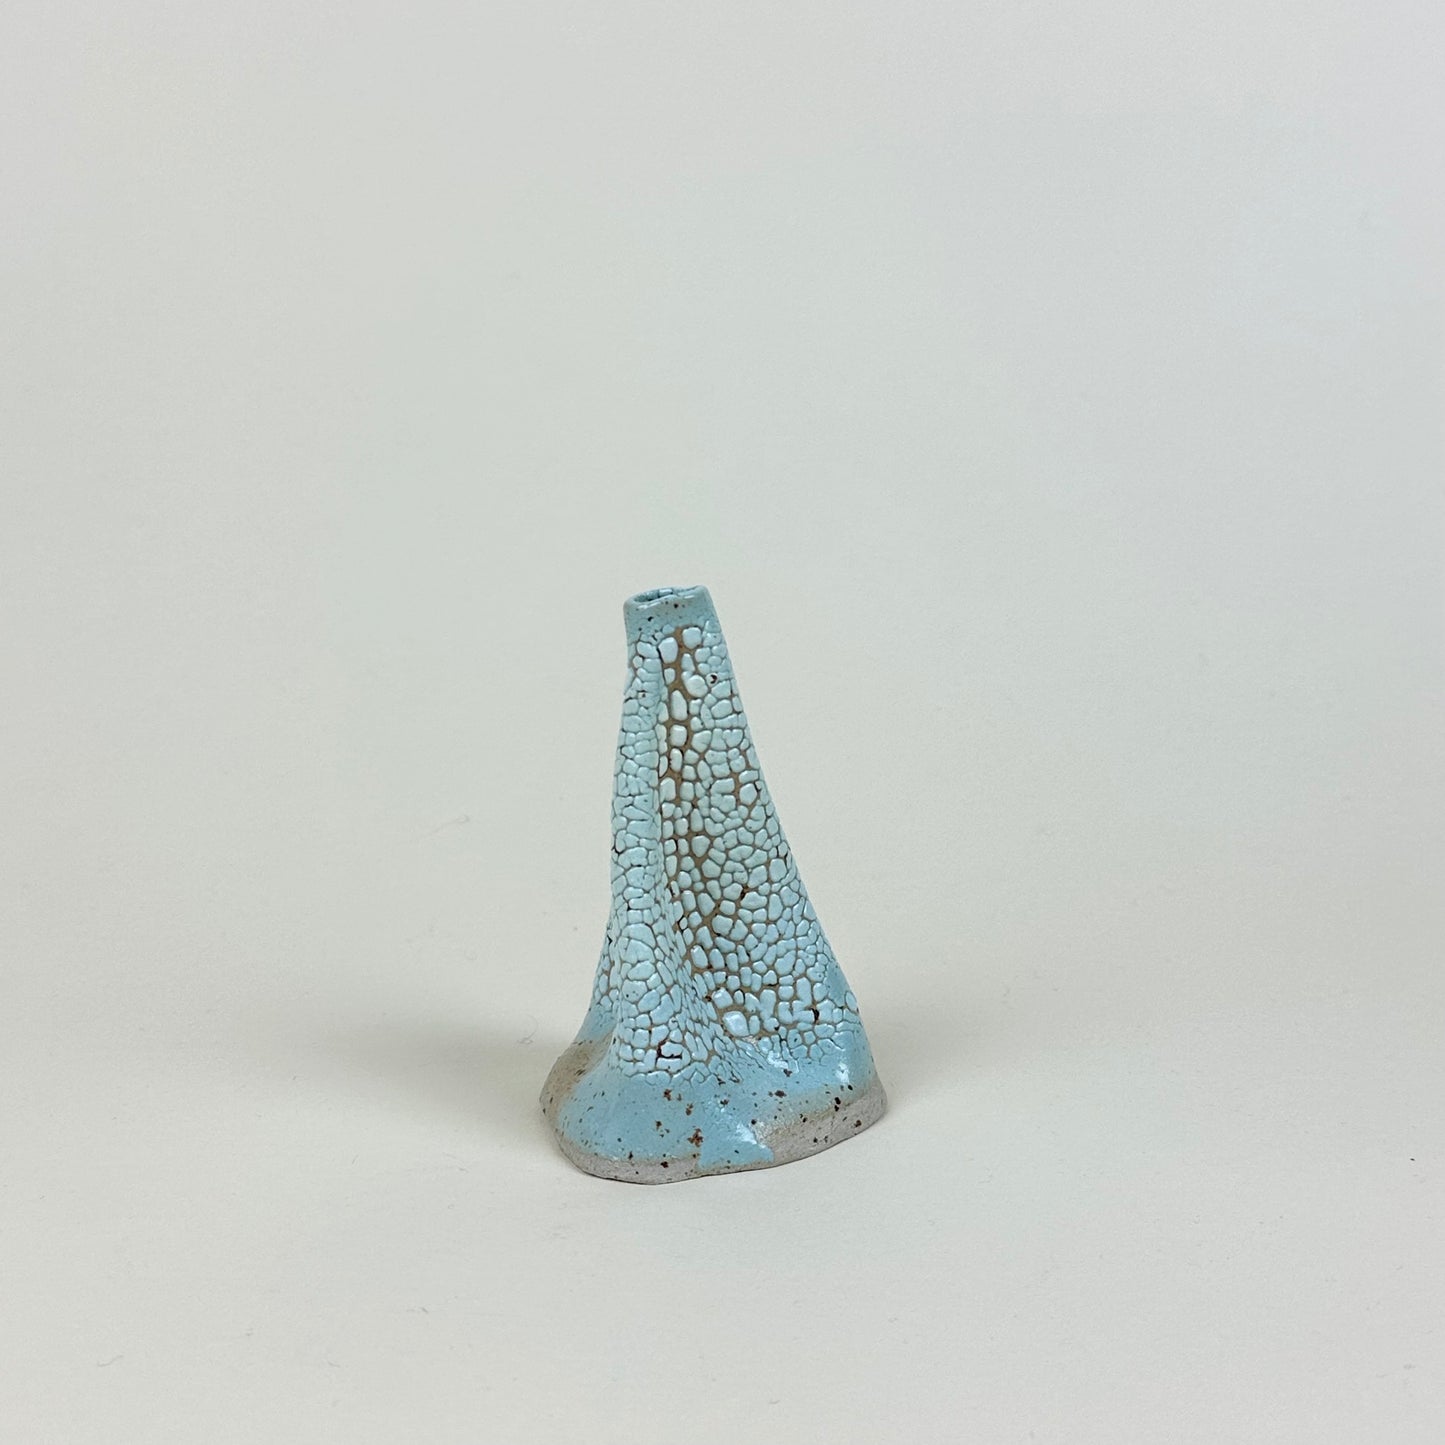 Stone and light blue volcano vase (S) by Astrid Öhman